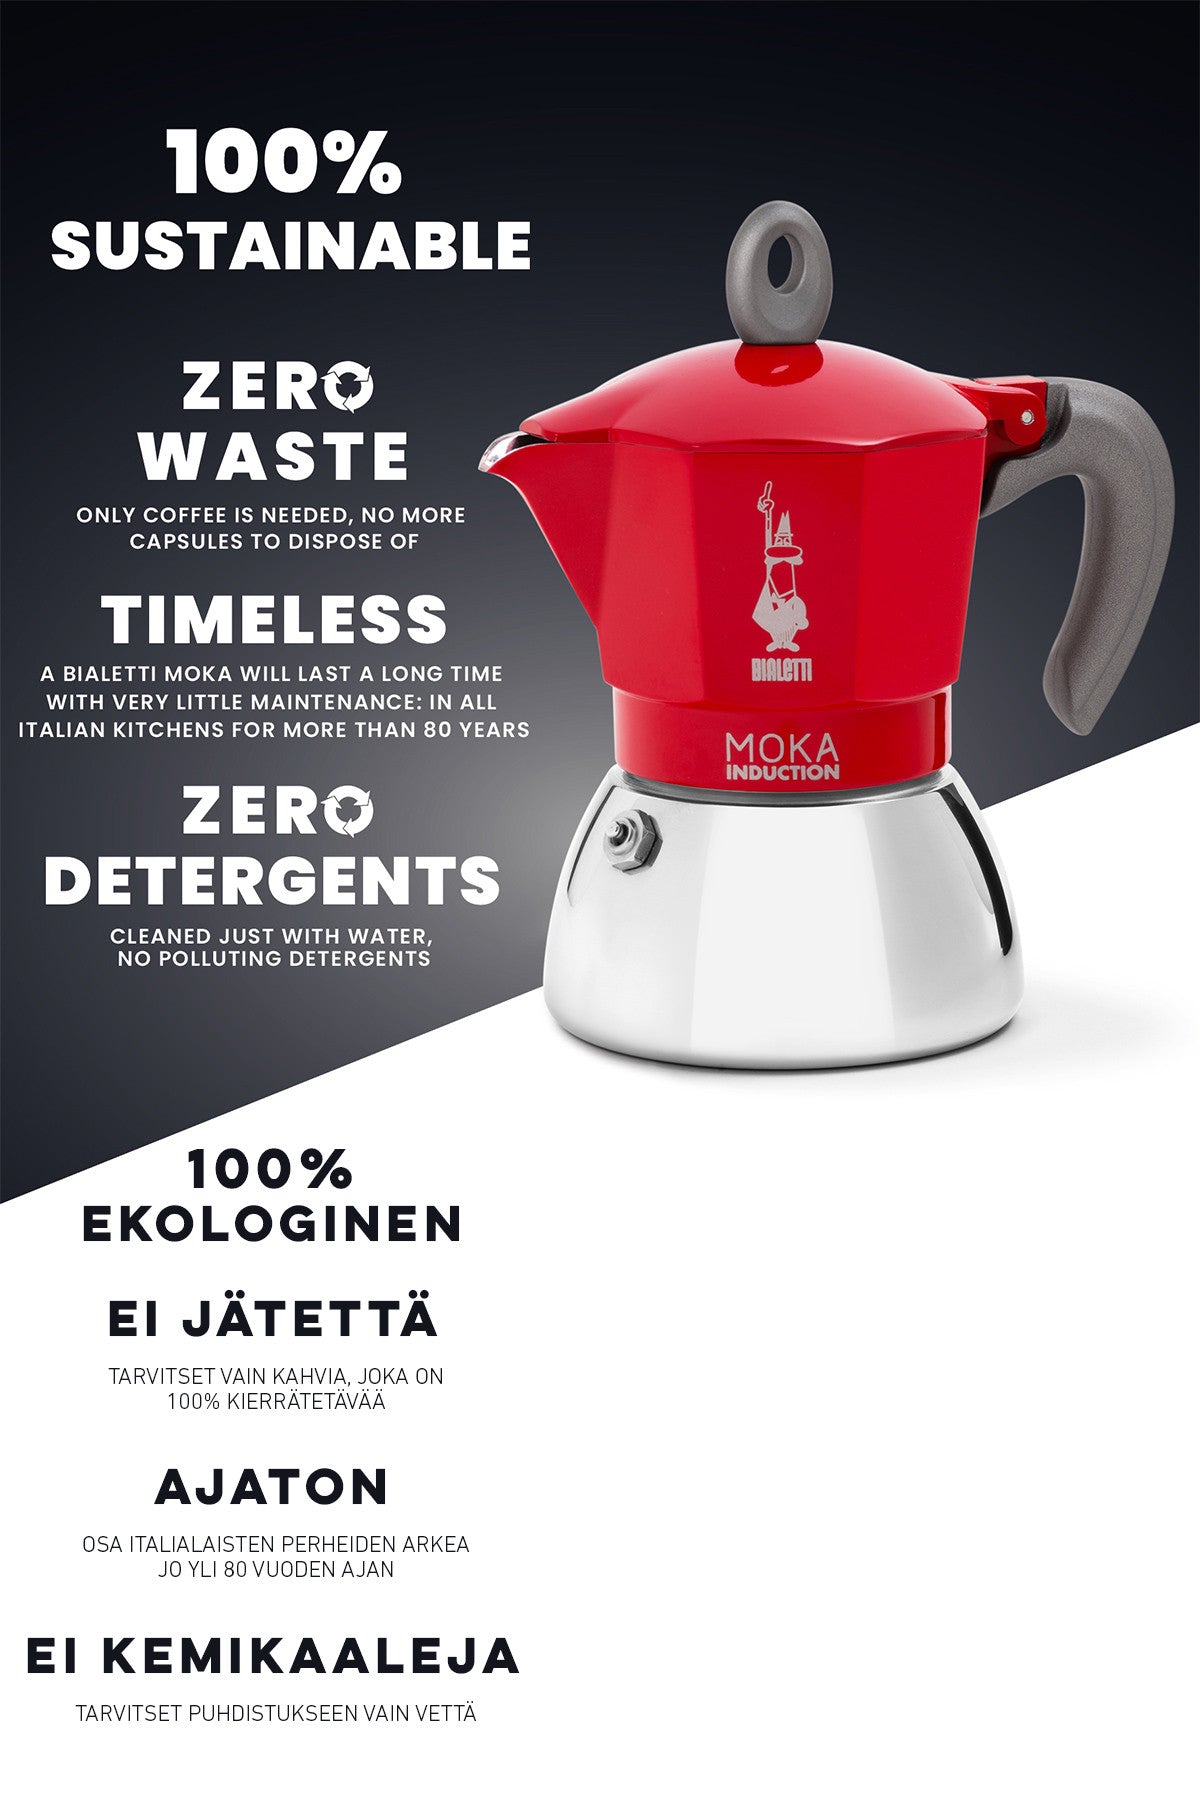 MOKA EXPRESS INDUCTION RED 2 CUPS, NEW